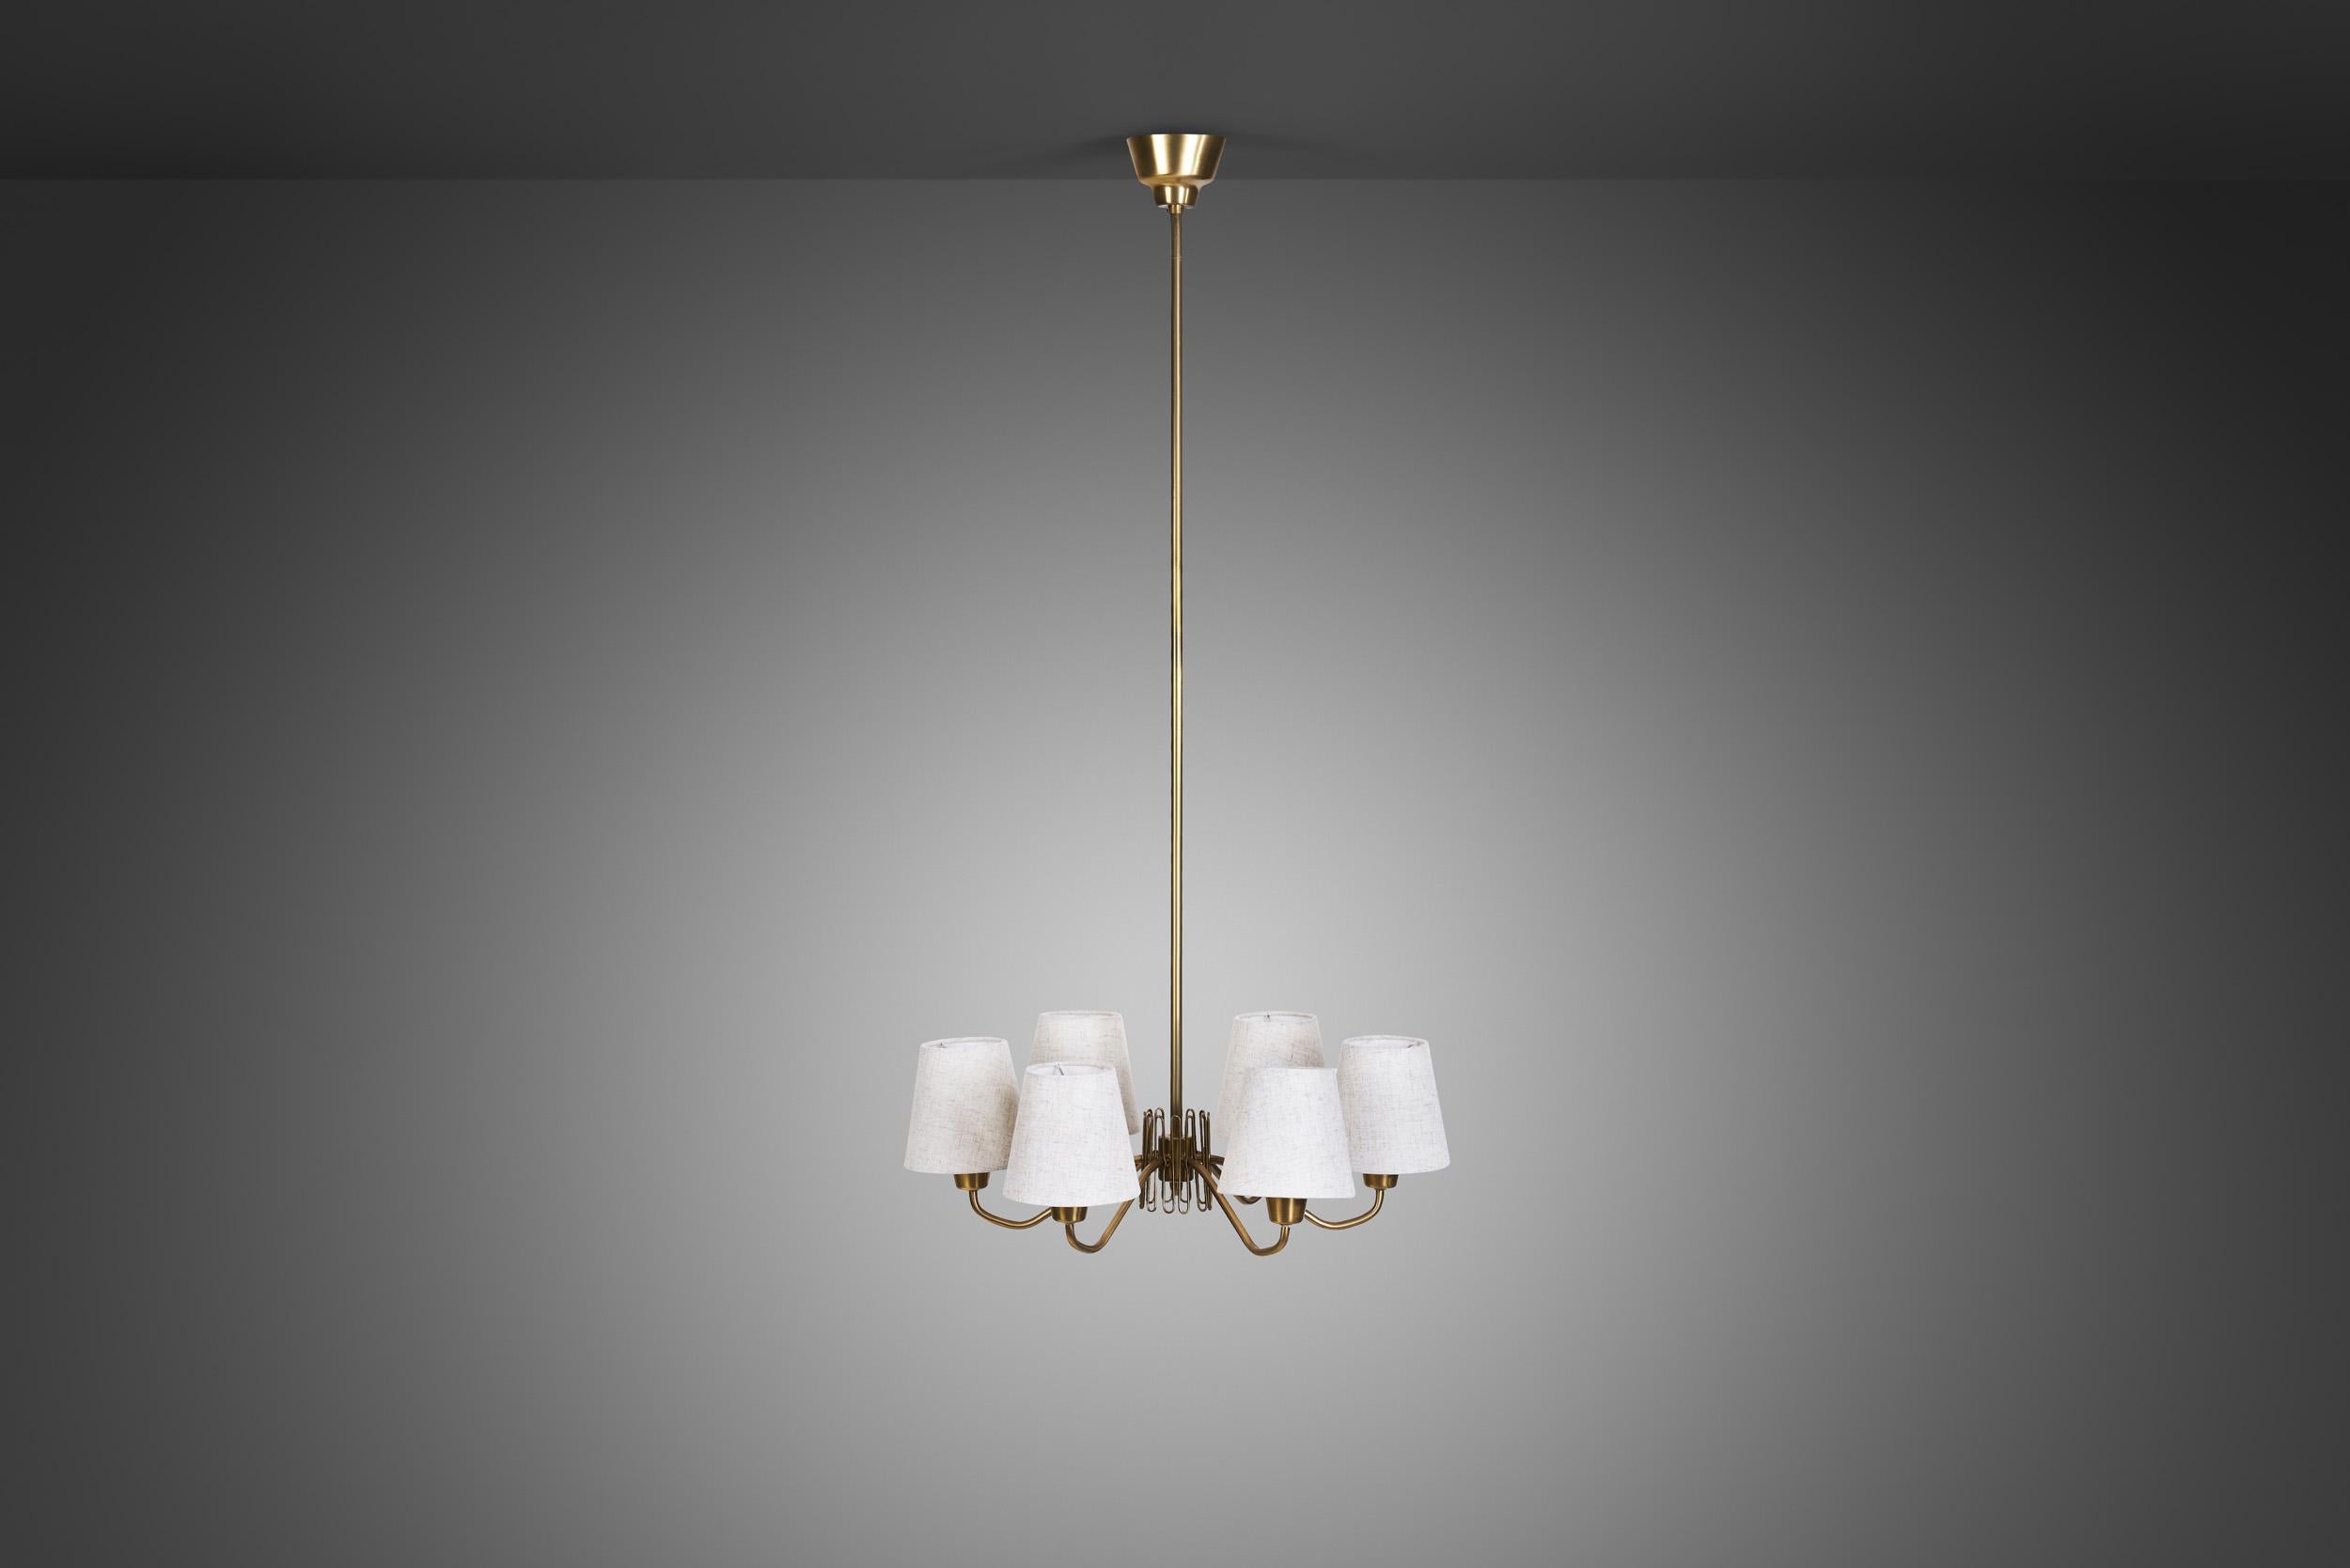 Swedish Modern Brass Ceiling Light with Fabric Shades, Sweden Mid-20th Century For Sale 3